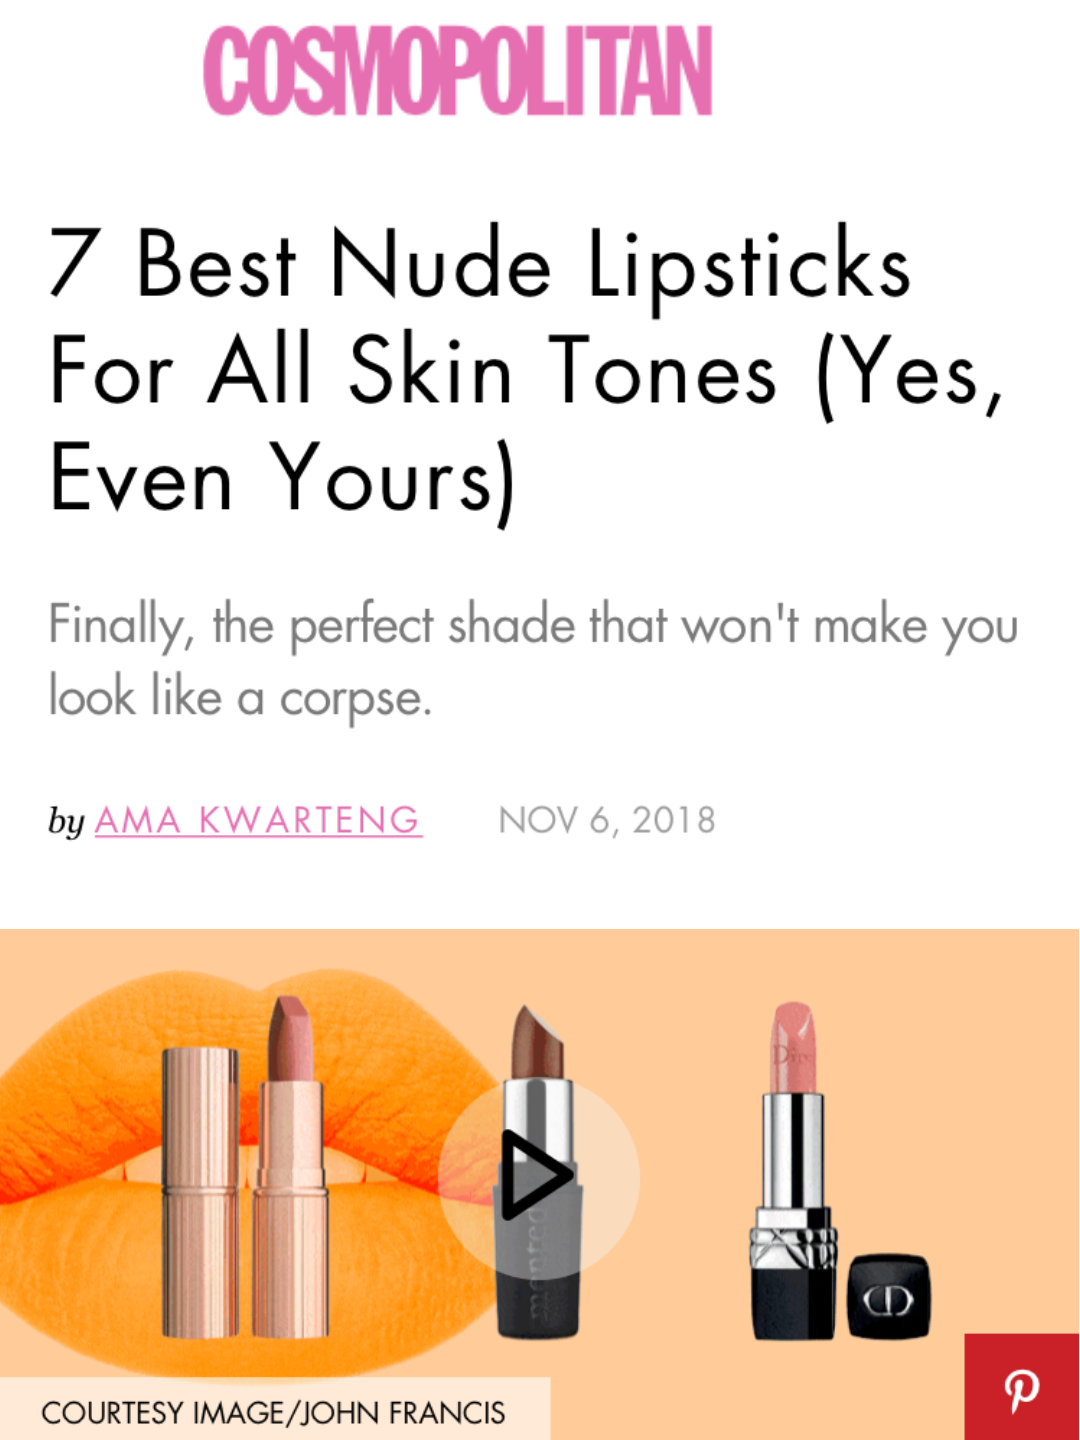 7 Best Nude Lipsticks For All Skin Tones (Yes, Even Yours)